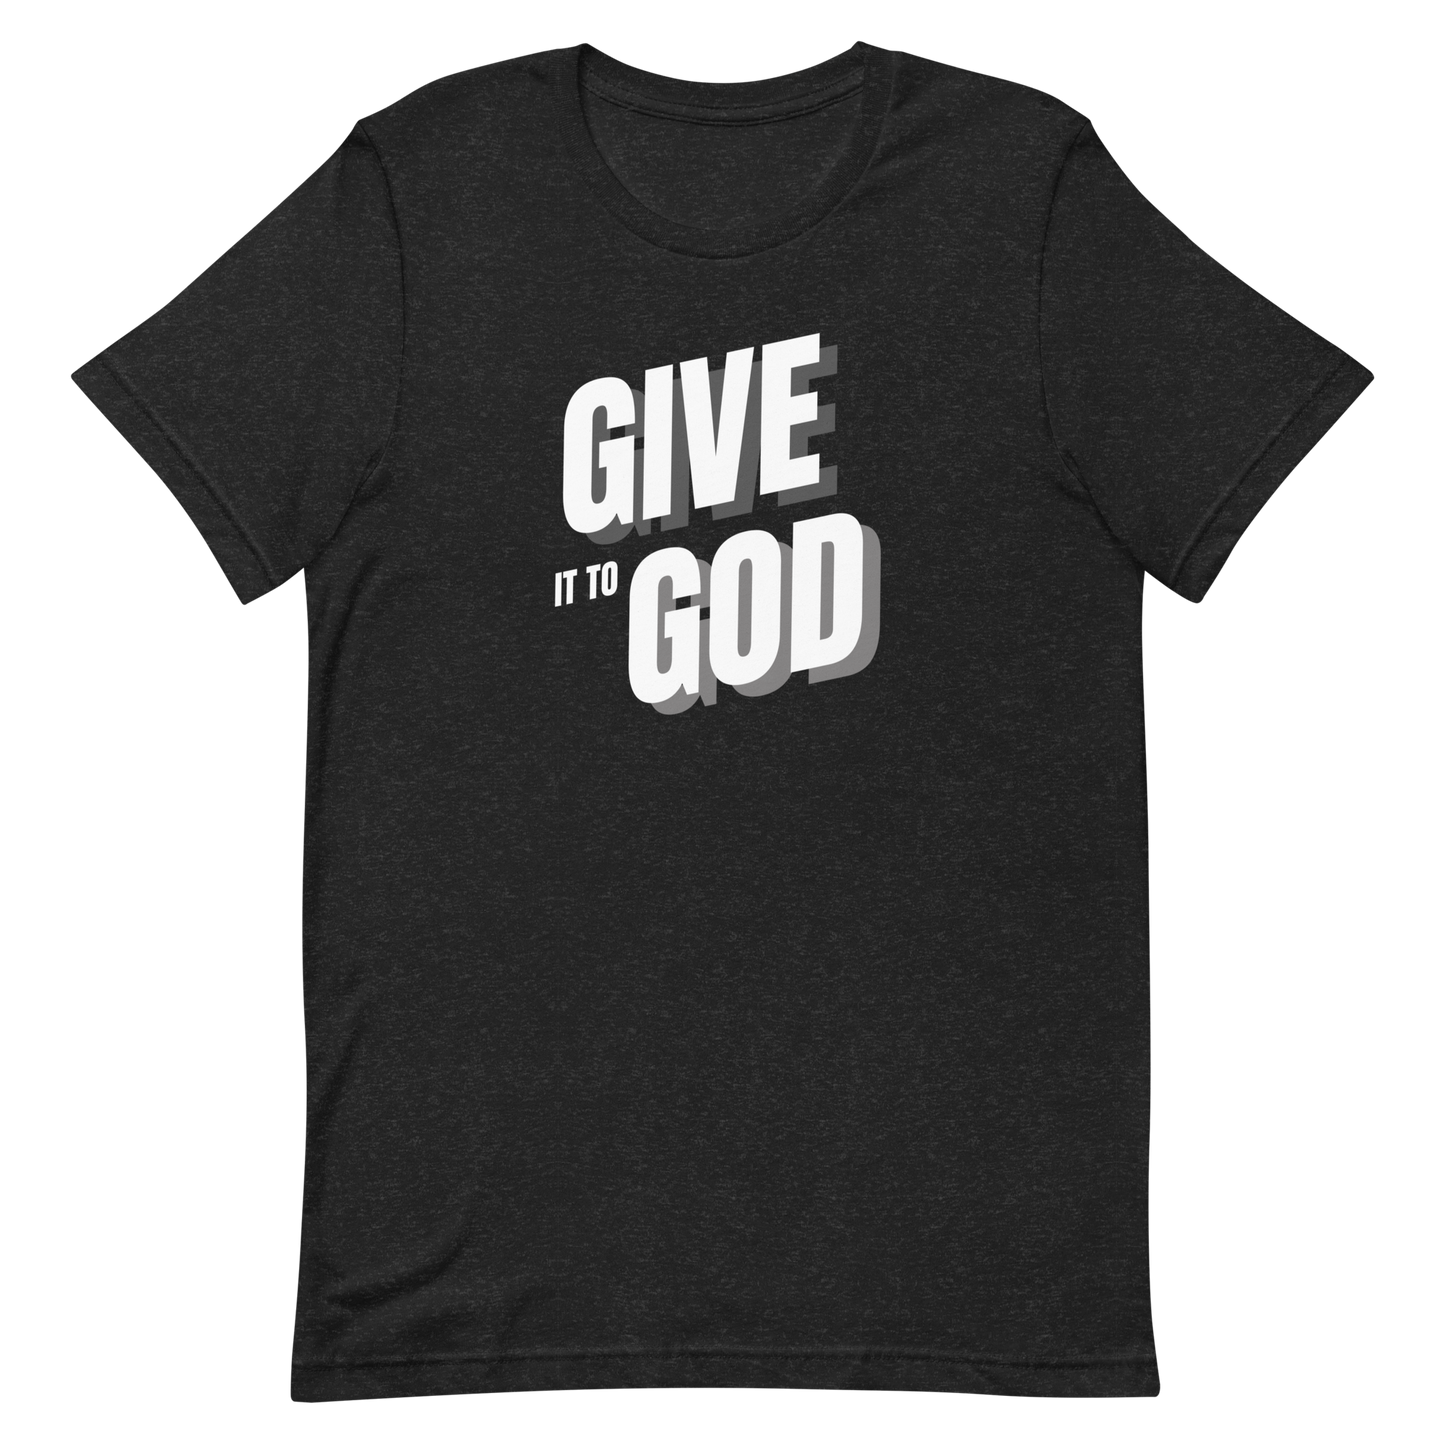 Give it to God t-shirt